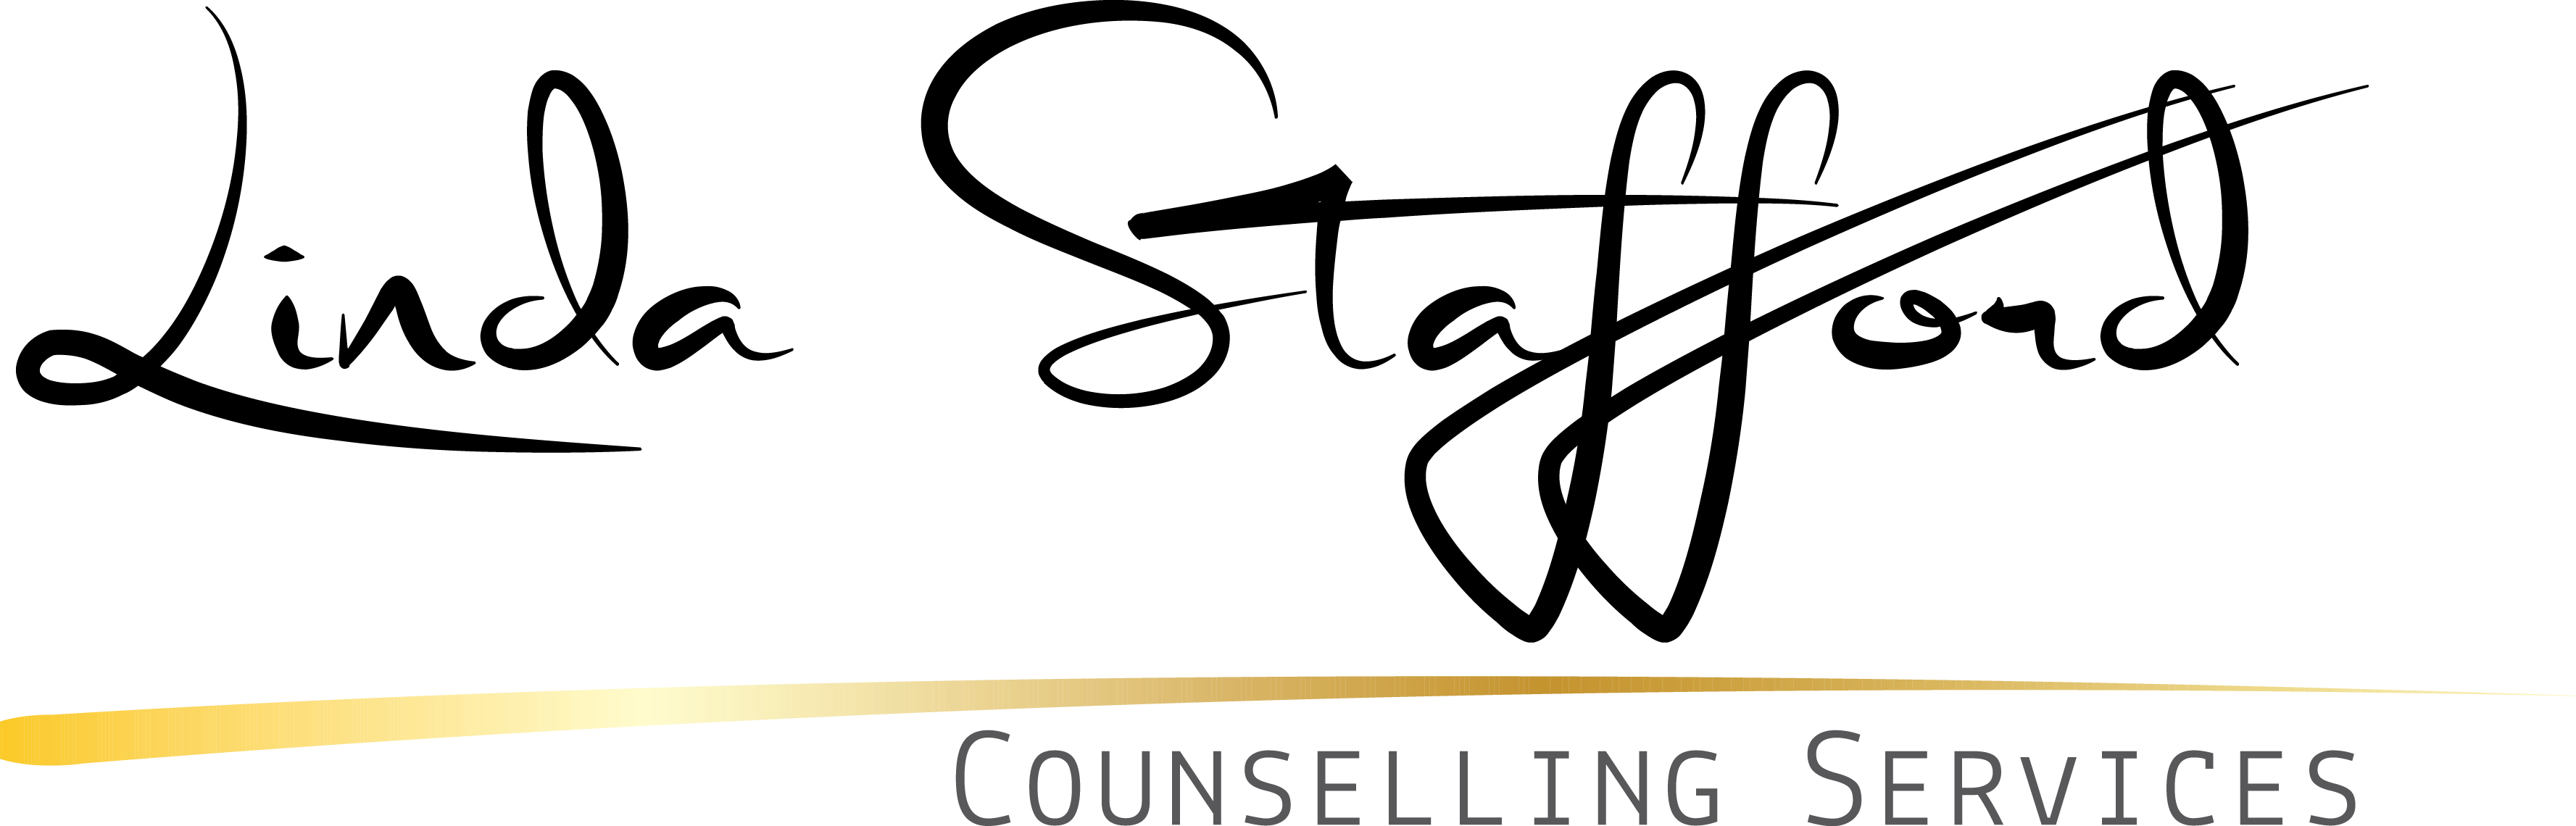 Linda Stafford Counselling Services logo